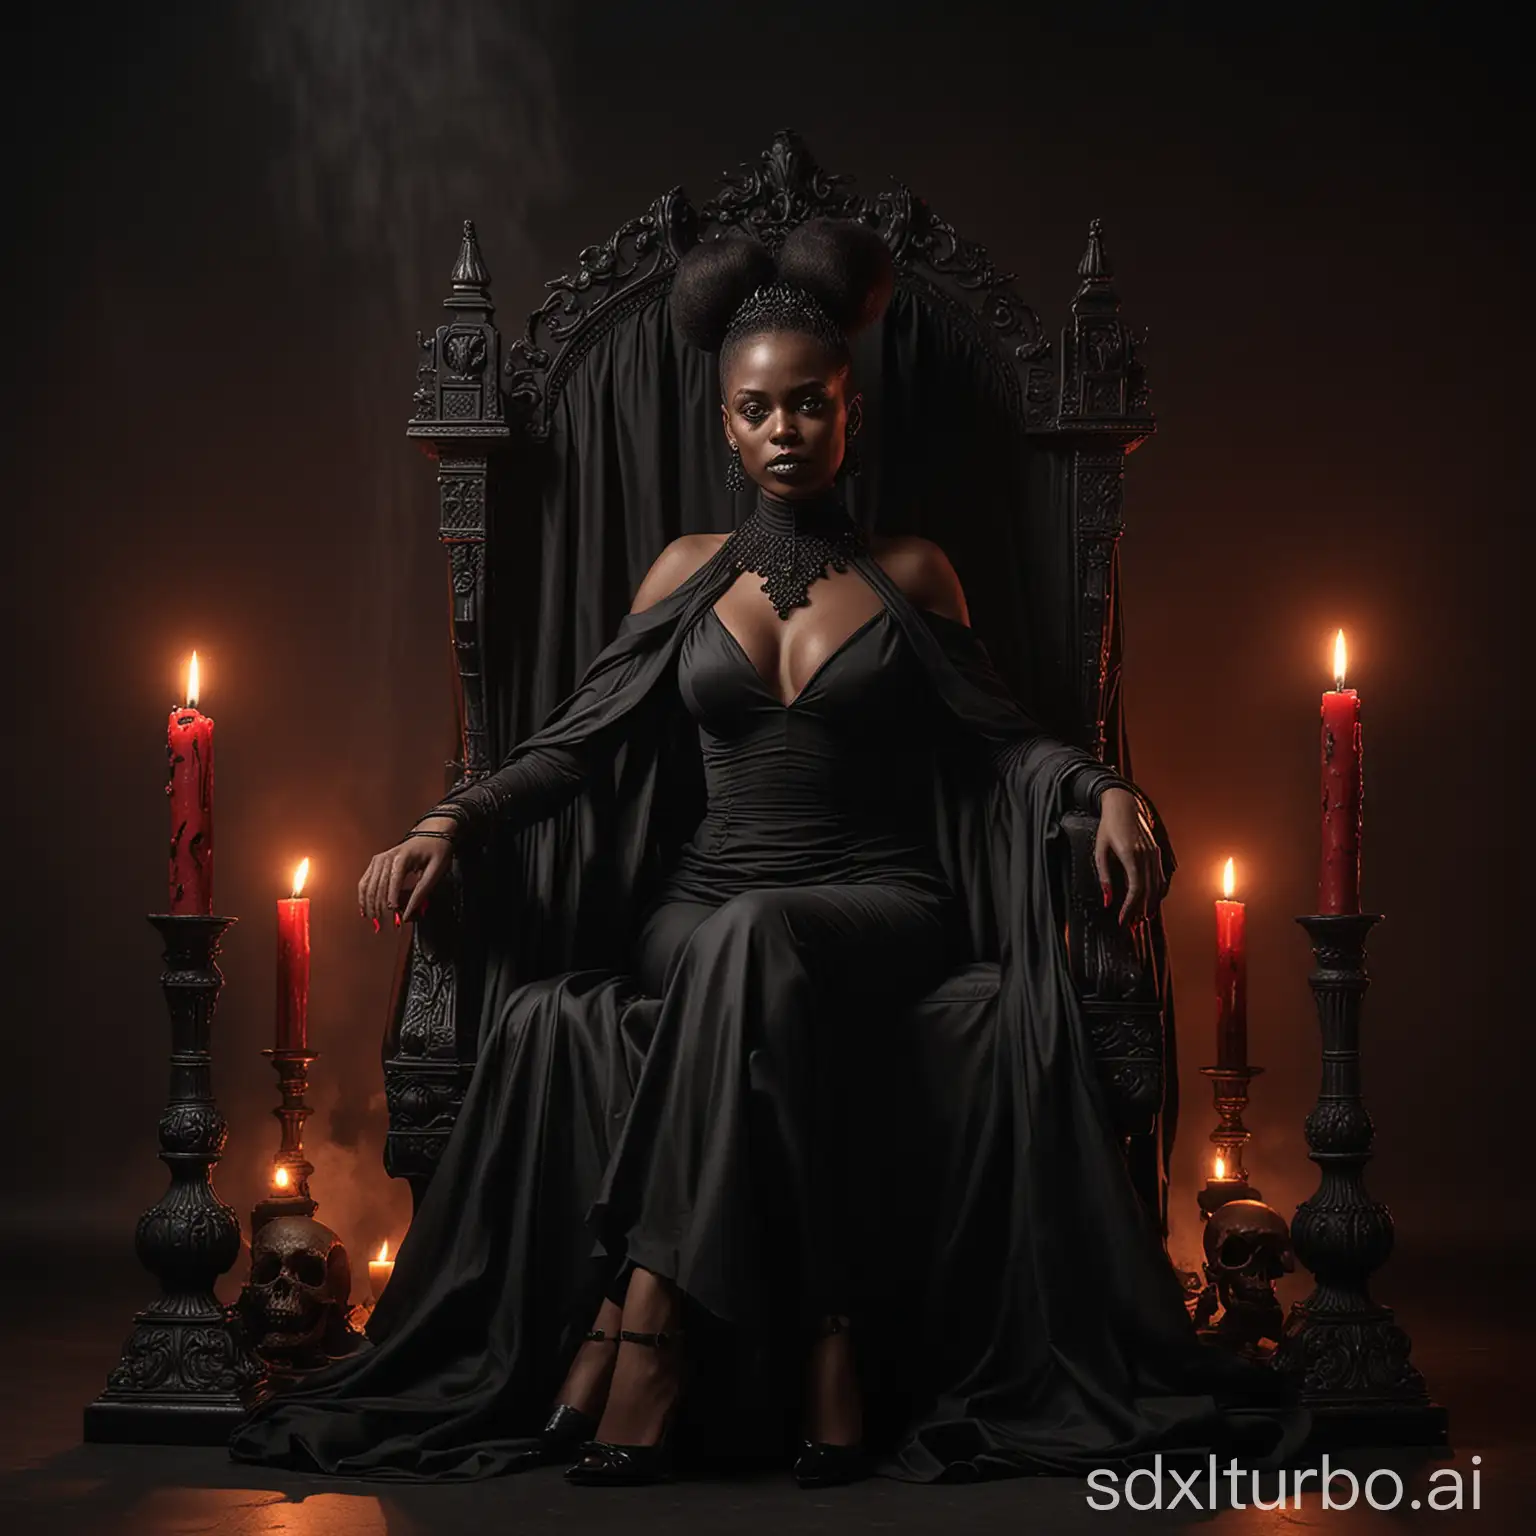 an imposing black woman sitting elegantly on a luxurious black throne. Her hair is styled in a bun and she exudes an air of authority. She wears a striking black outfit, complete with high-necked black cape and high heels, further accentuating her majestic presence. Two skulls with burning red candles on top rest ominously on either side of it, casting a mysterious yet fascinating shadow. The atmosphere is enchanting, evoking feelings of ancient wisdom, power and mystique